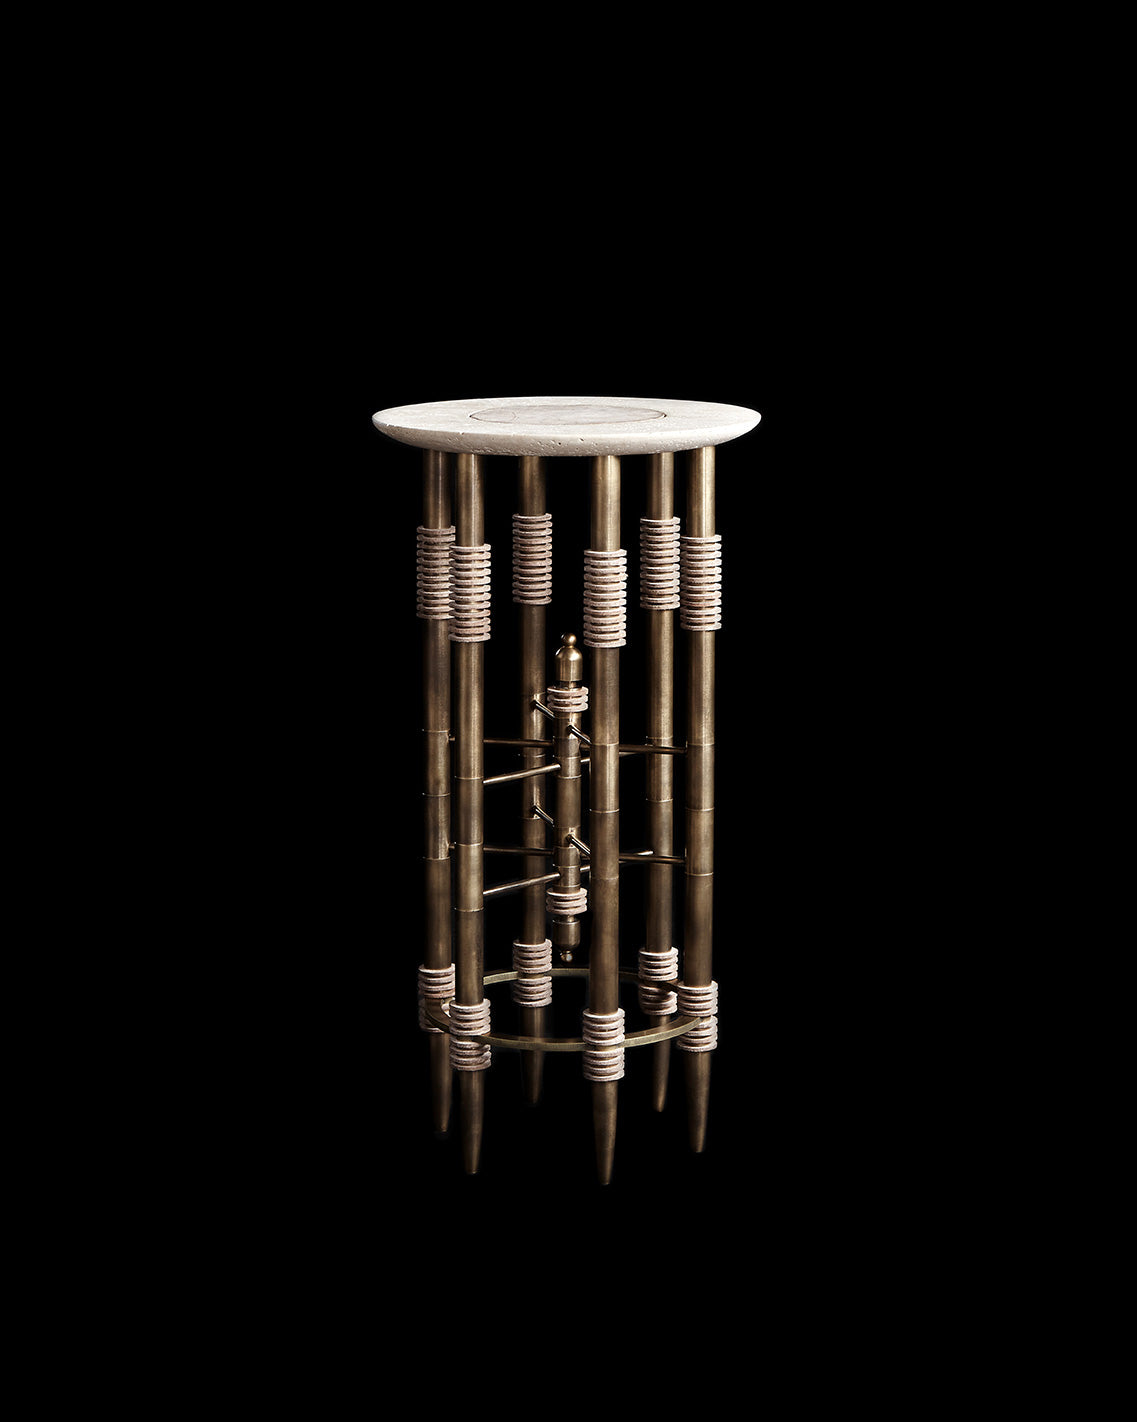 PARS cocktail table in Aged Brass, with Travertine Stone and Bisque Leather. 